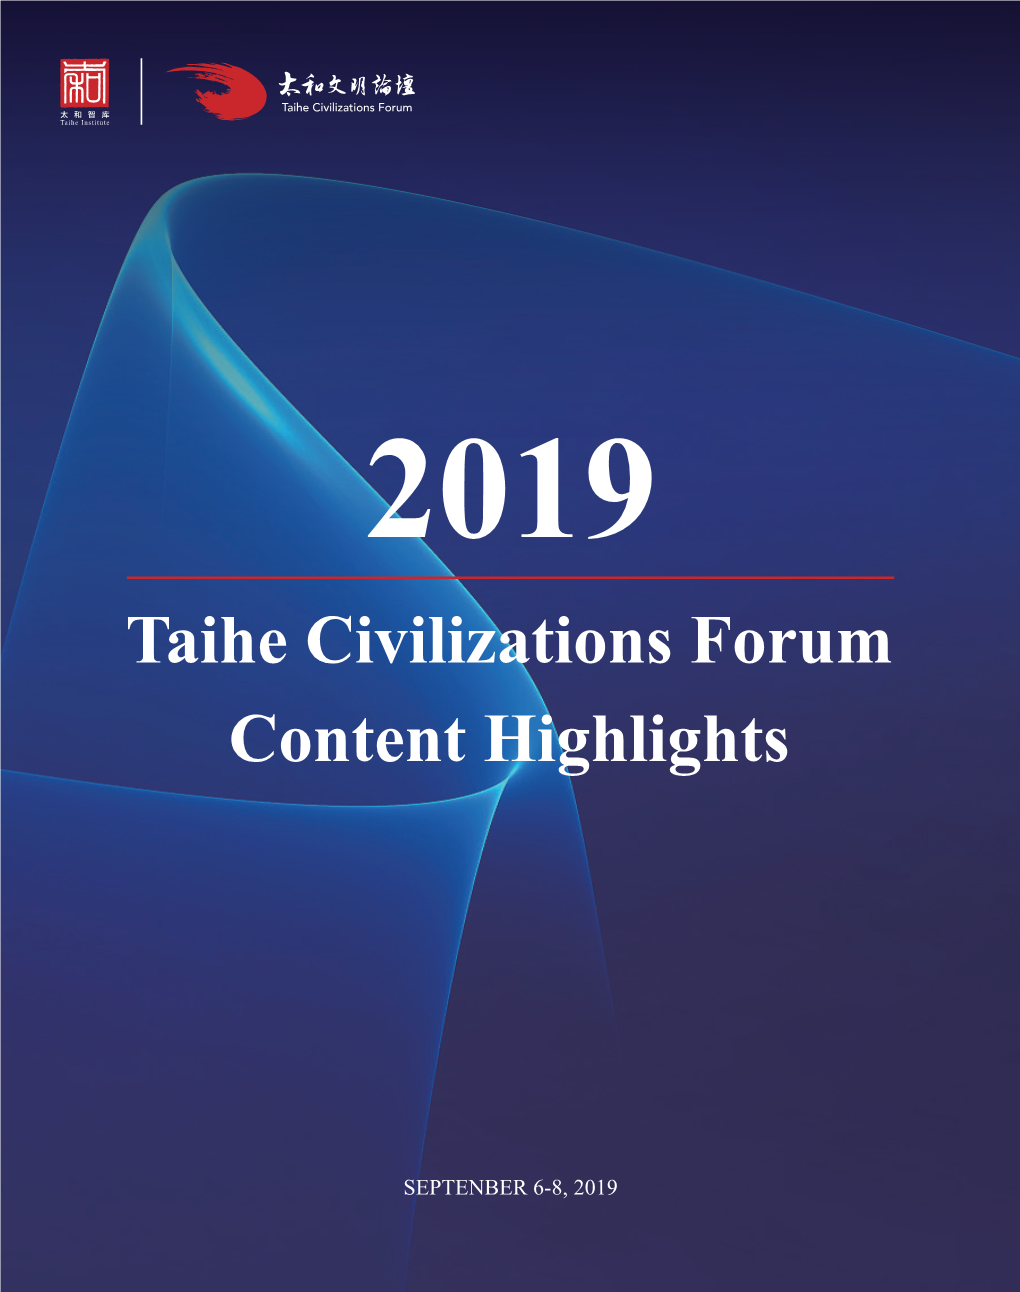 Taihe Civilizations Forum Content Highlights